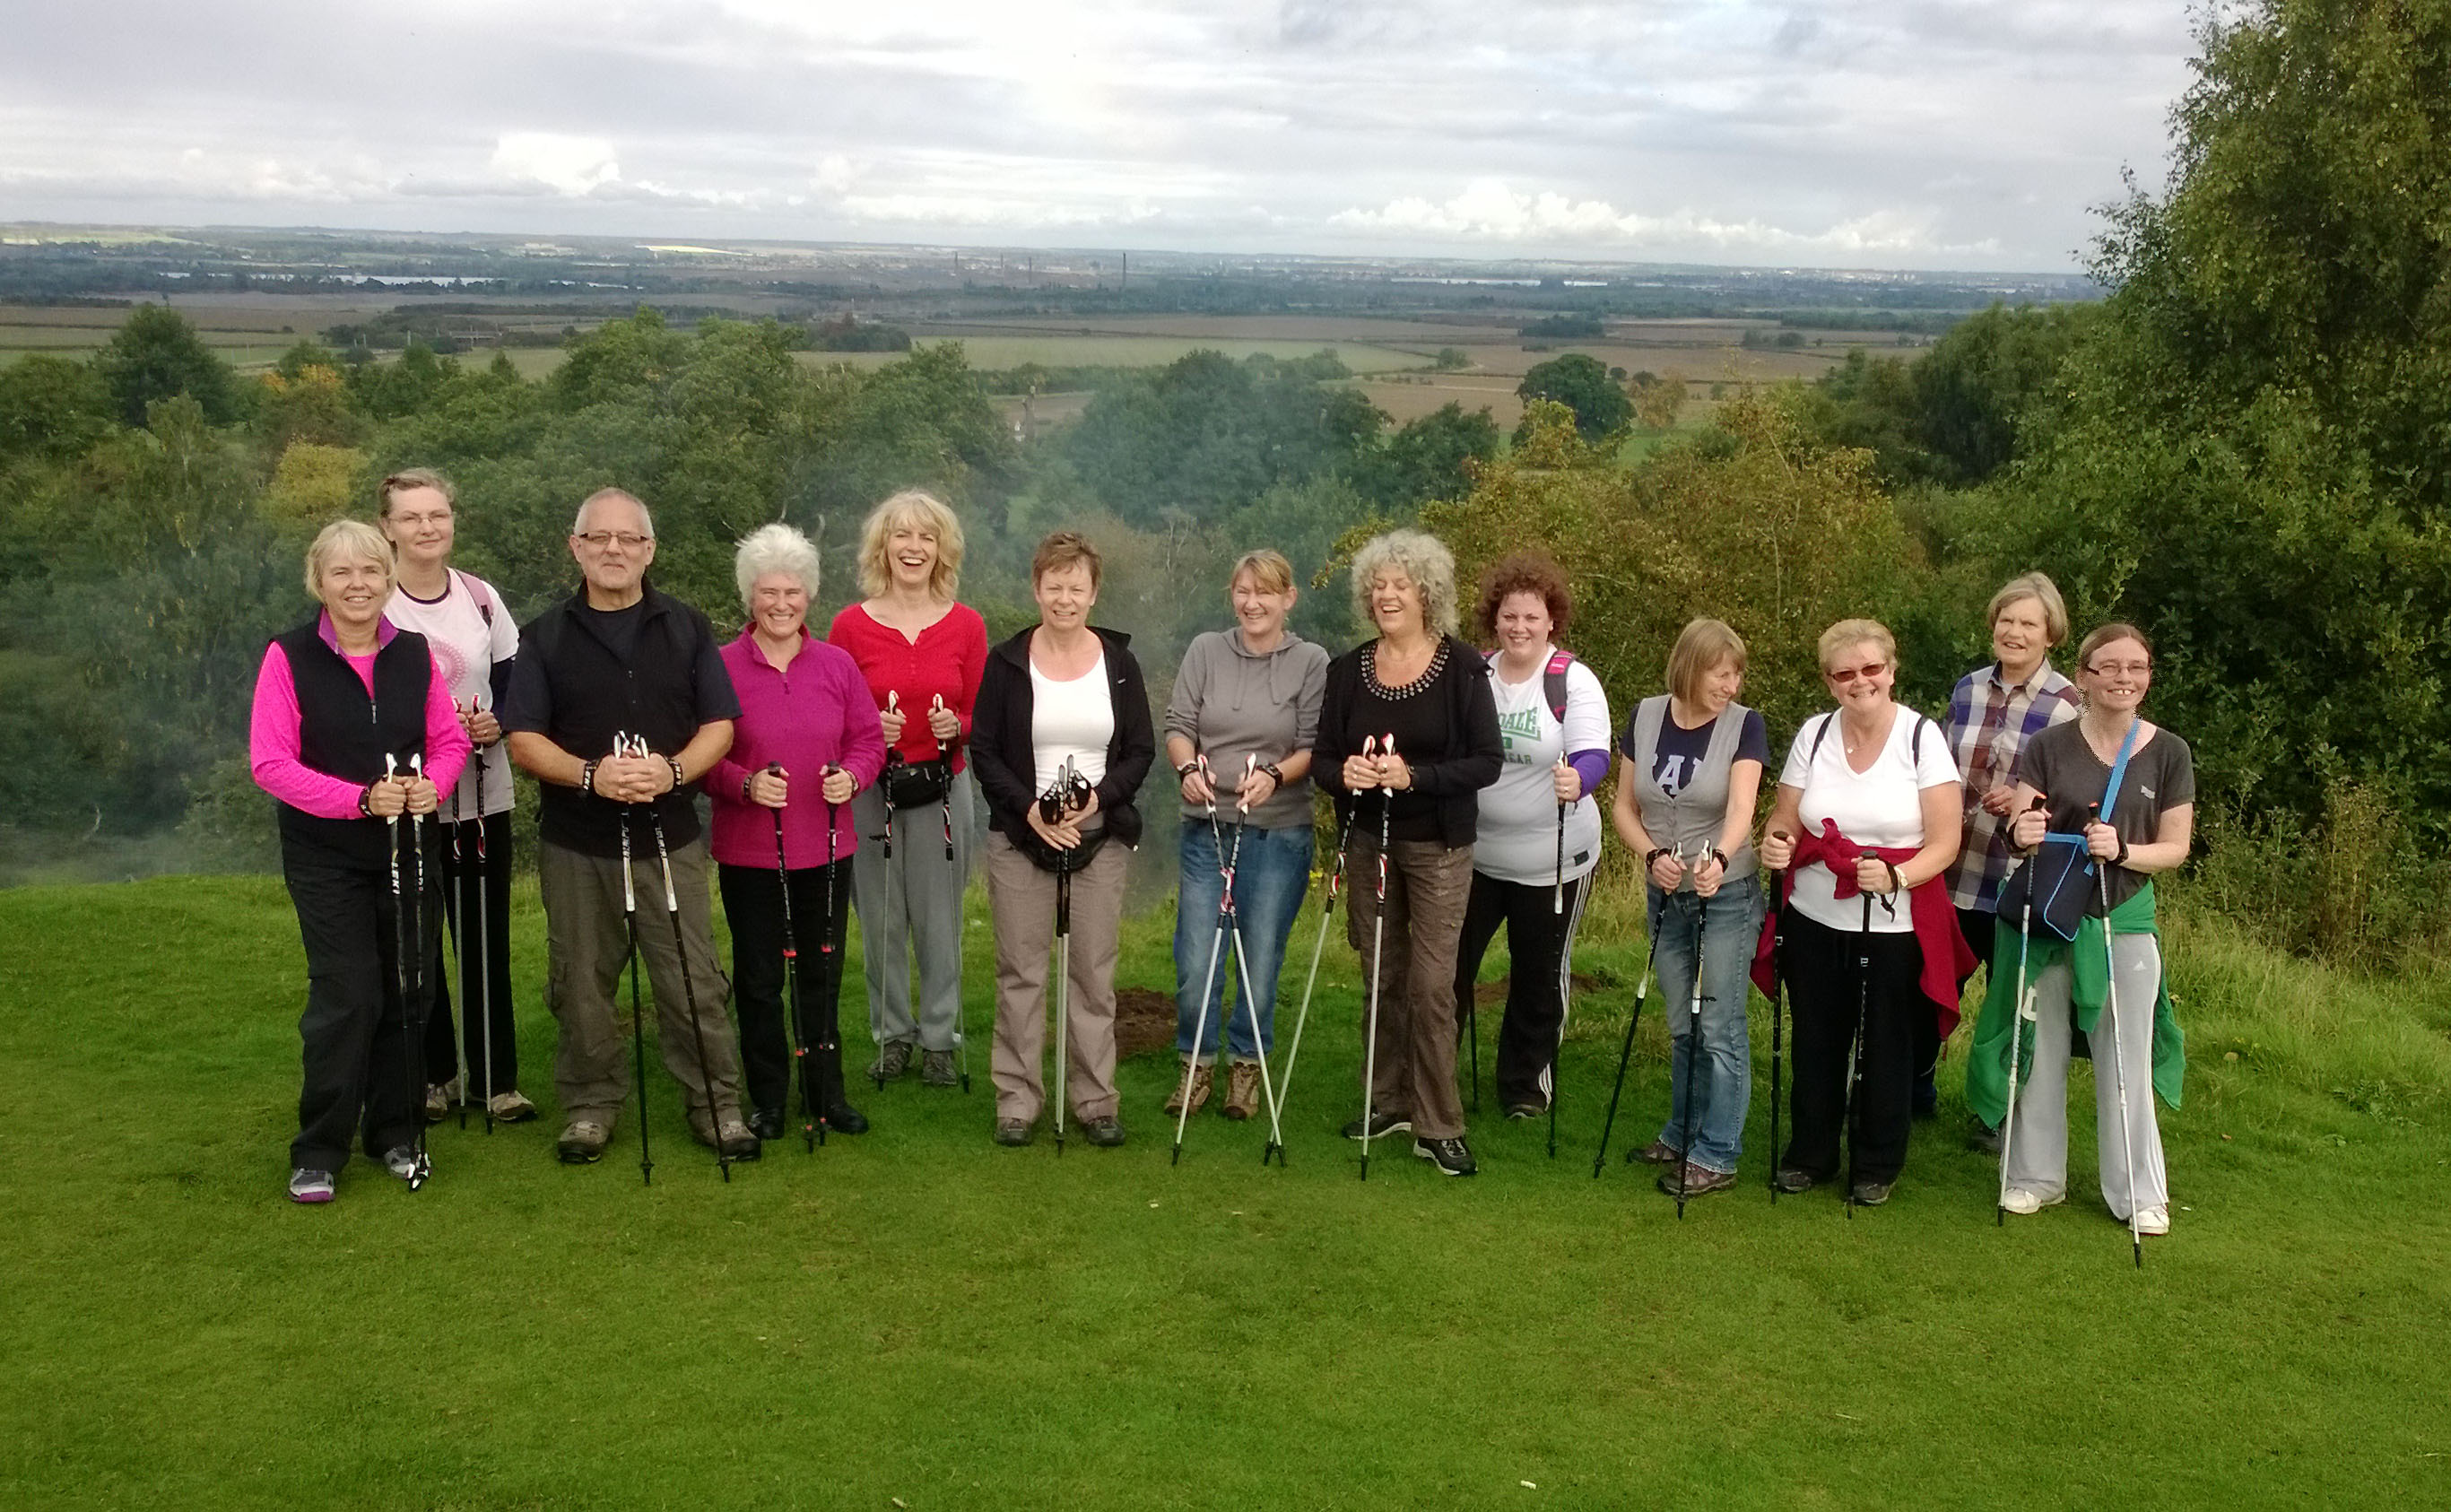 Saturday Ampthill Group October 2013